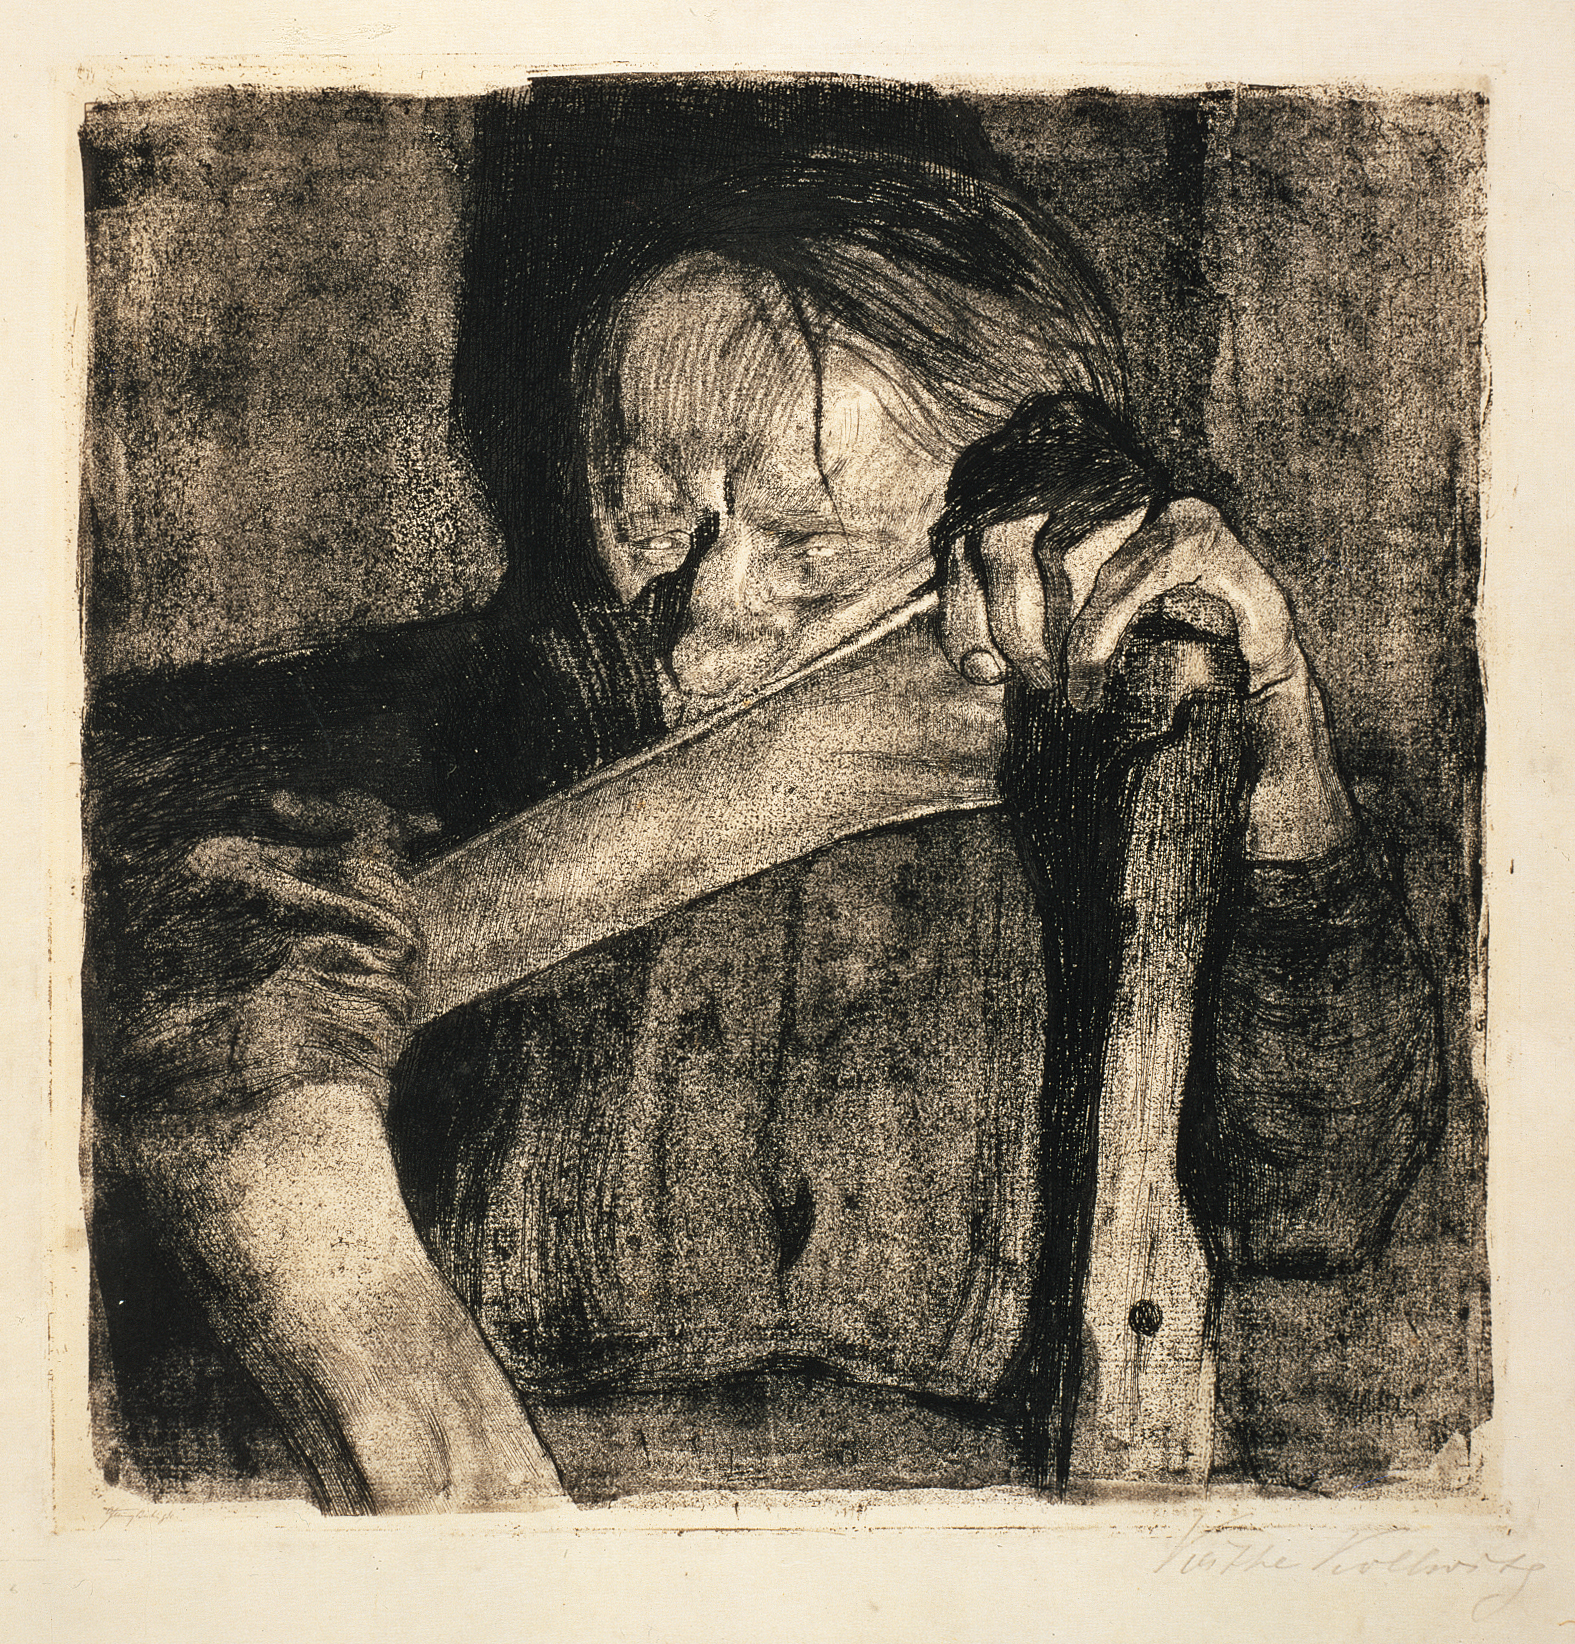 Käthe Kollwitz, Sharpening the Scythe, fifth proof of sheet 3 for the »Peasants War« cycle, 1905, line etching, drypoint, sandpaper, aquatint, needle lines and soft ground with imprint of laid paper and Ziegler's transfer paper, Kn 88 V, Cologne Kollwitz Collection © Käthe Kollwitz Museum Köln